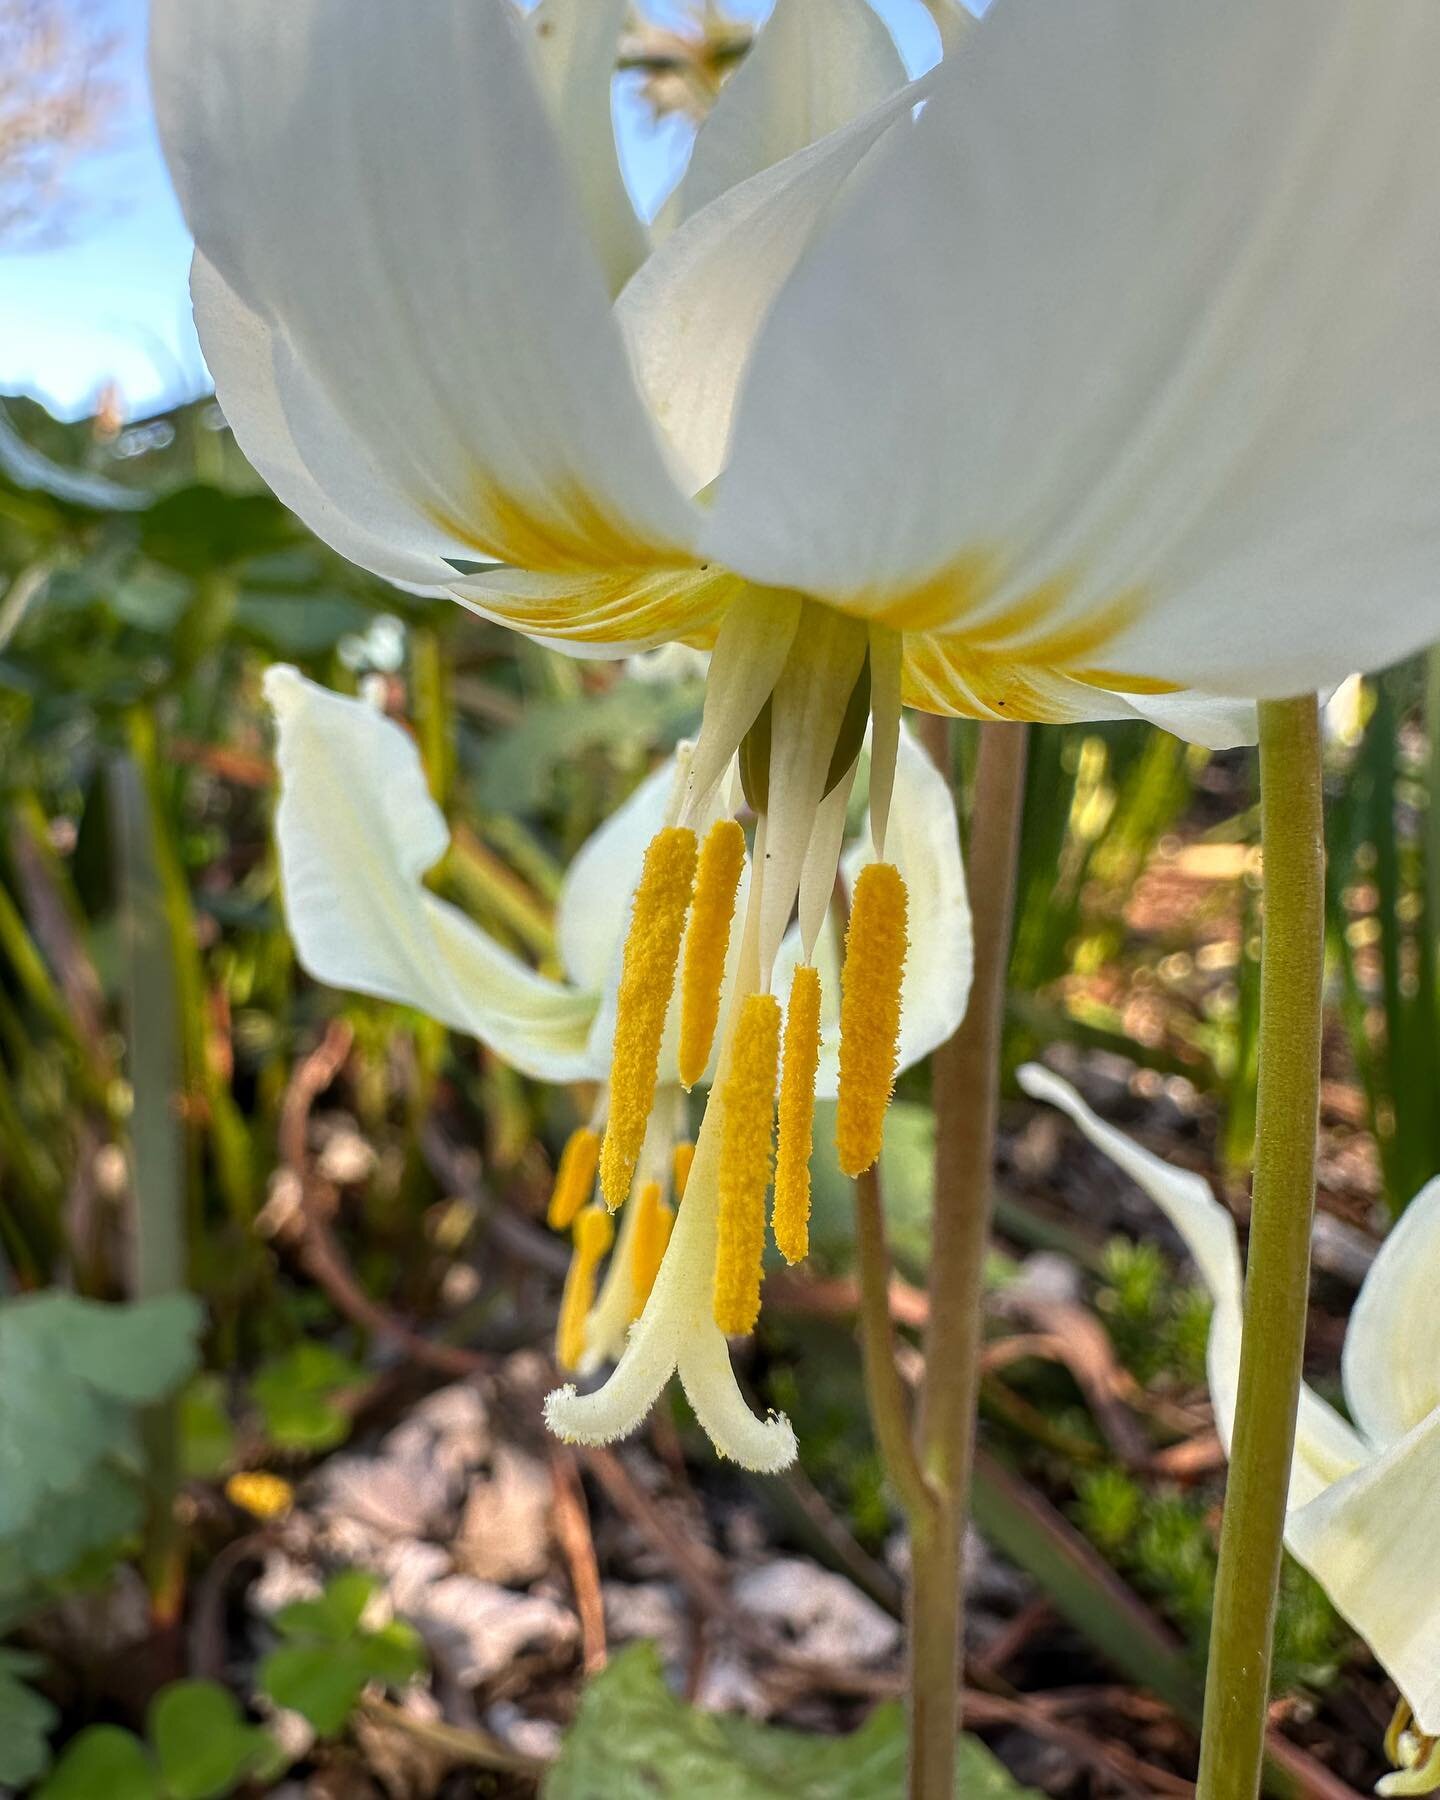 Oregon Fawn Lily 
Erythronium oregonum

Also known as my favorite bulb. In spring, most gardens are filled with tulip and daffodil bulbs. Why not fill your spring garden with native bulbs, cause seriously, they are so friggin cool looking. Coolest th